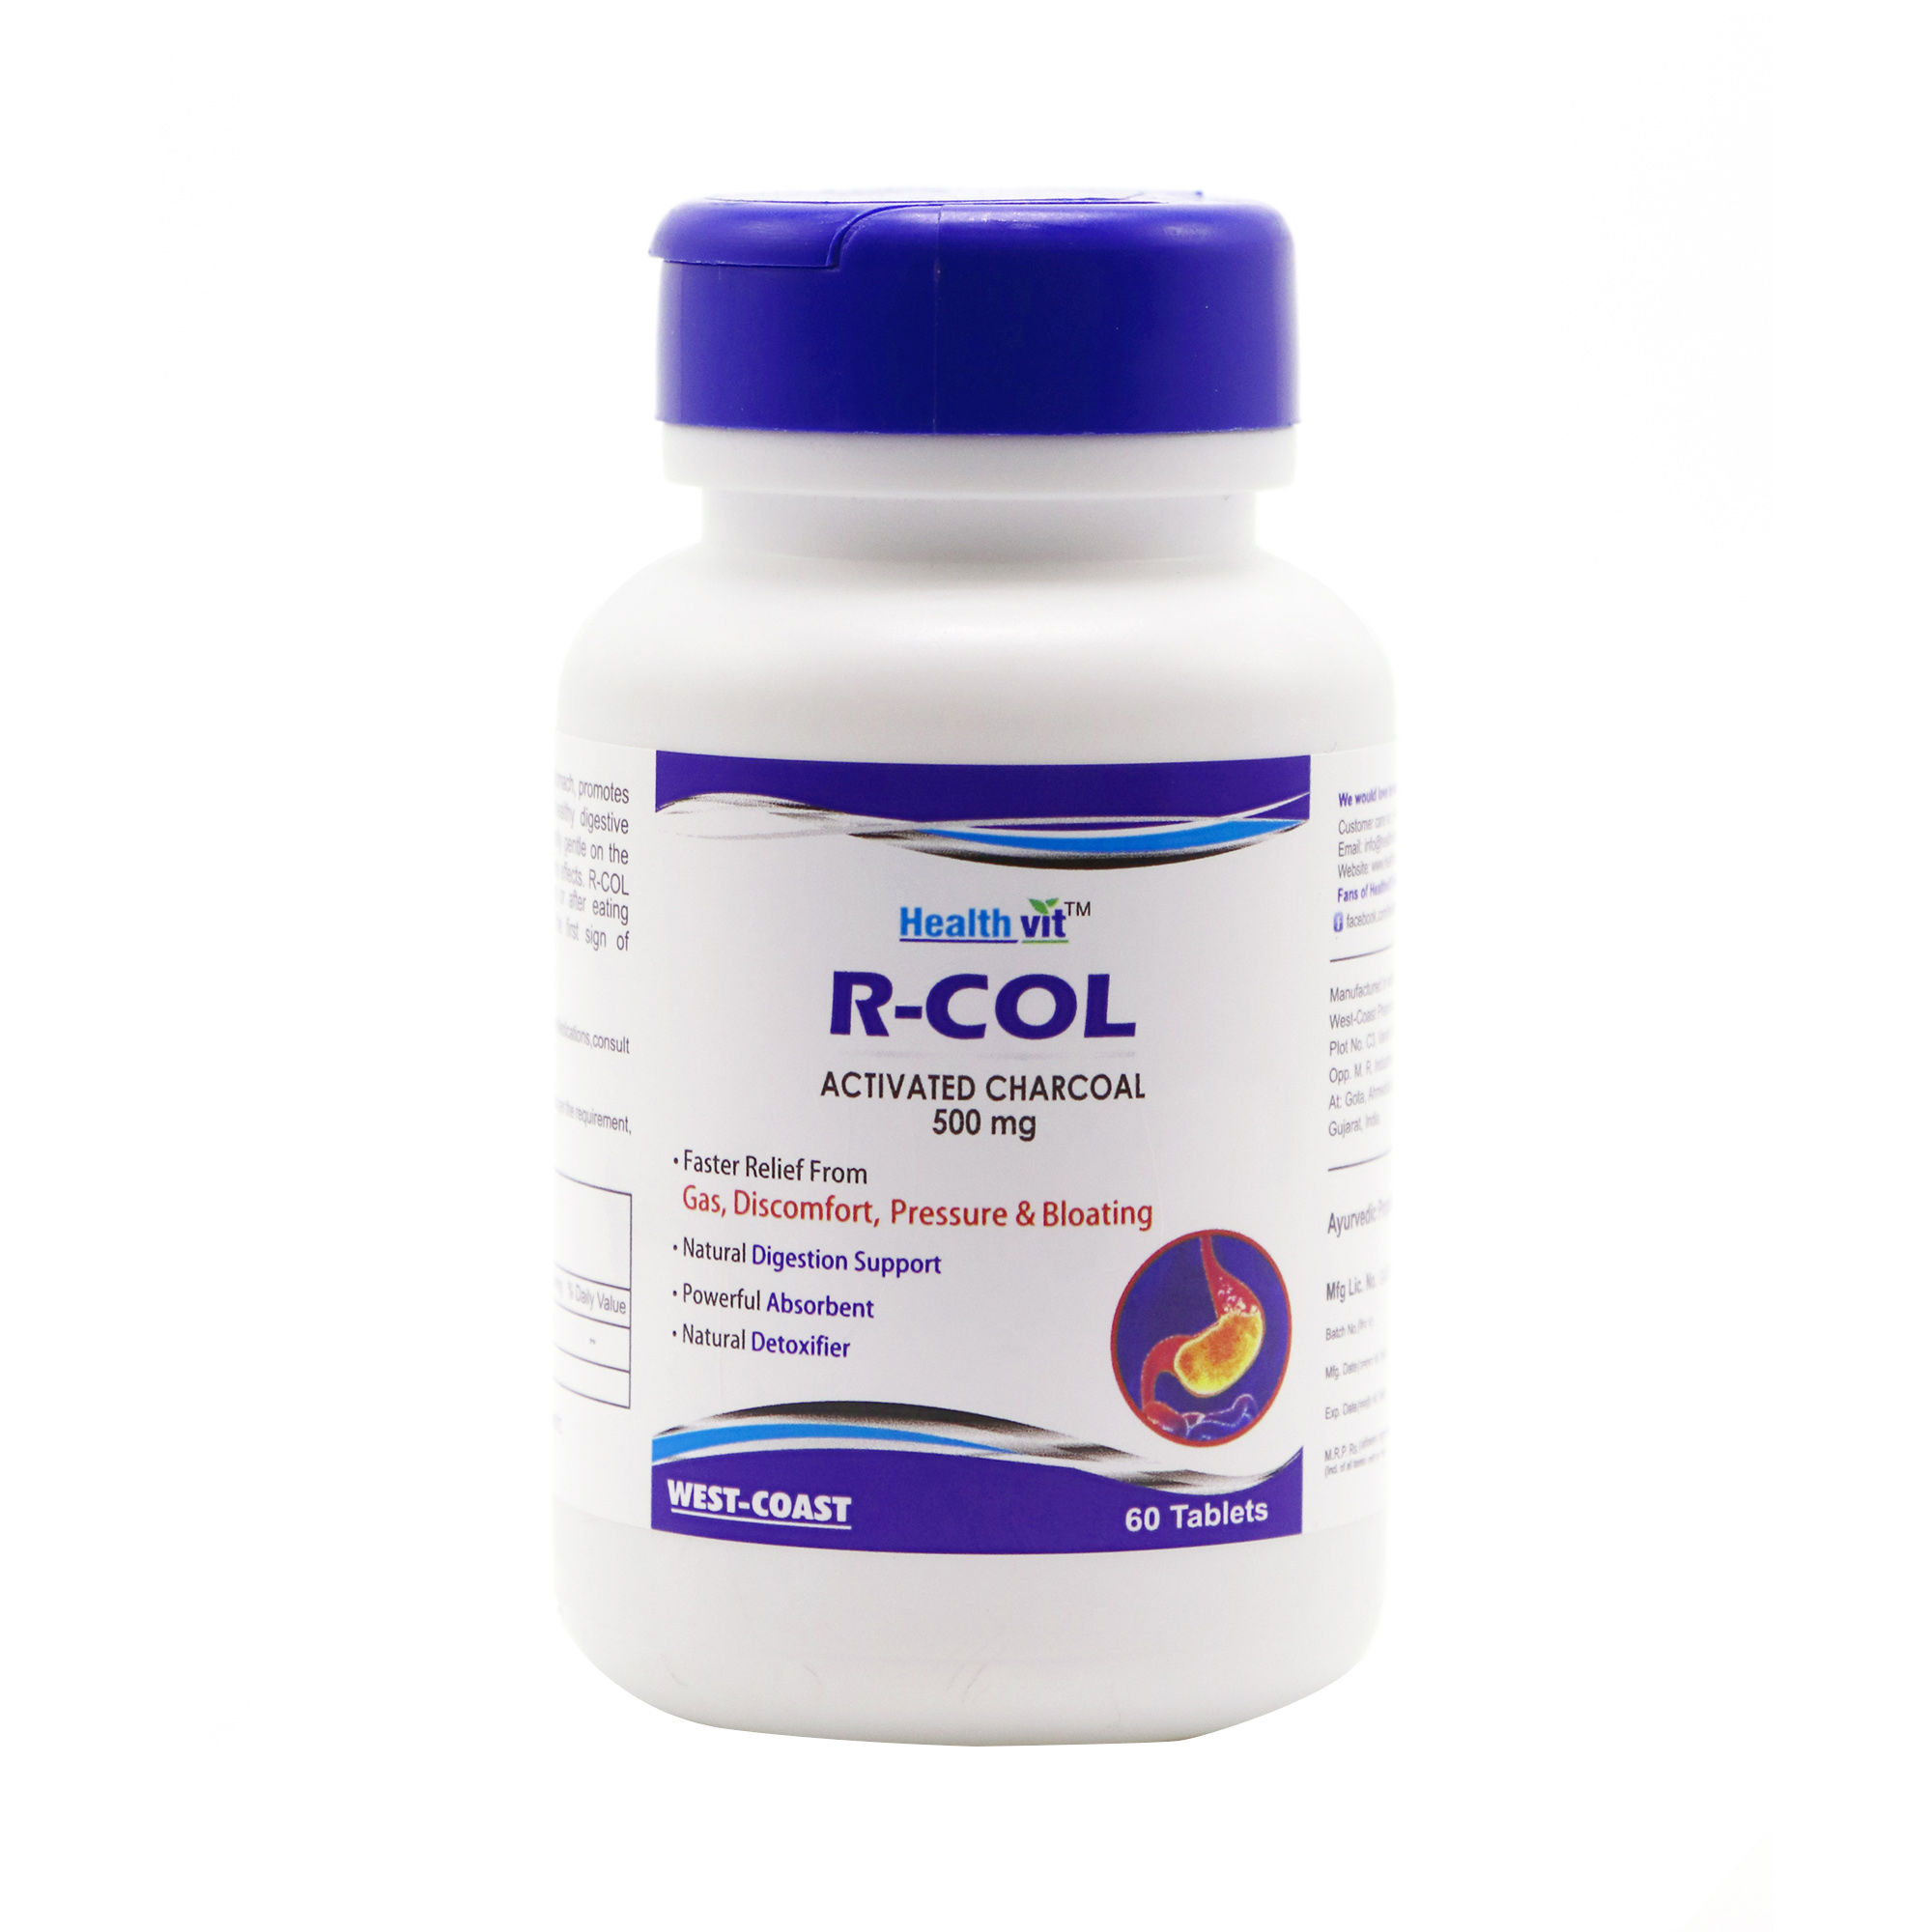 Healthvit R-COL Activated Charcoal 500mg